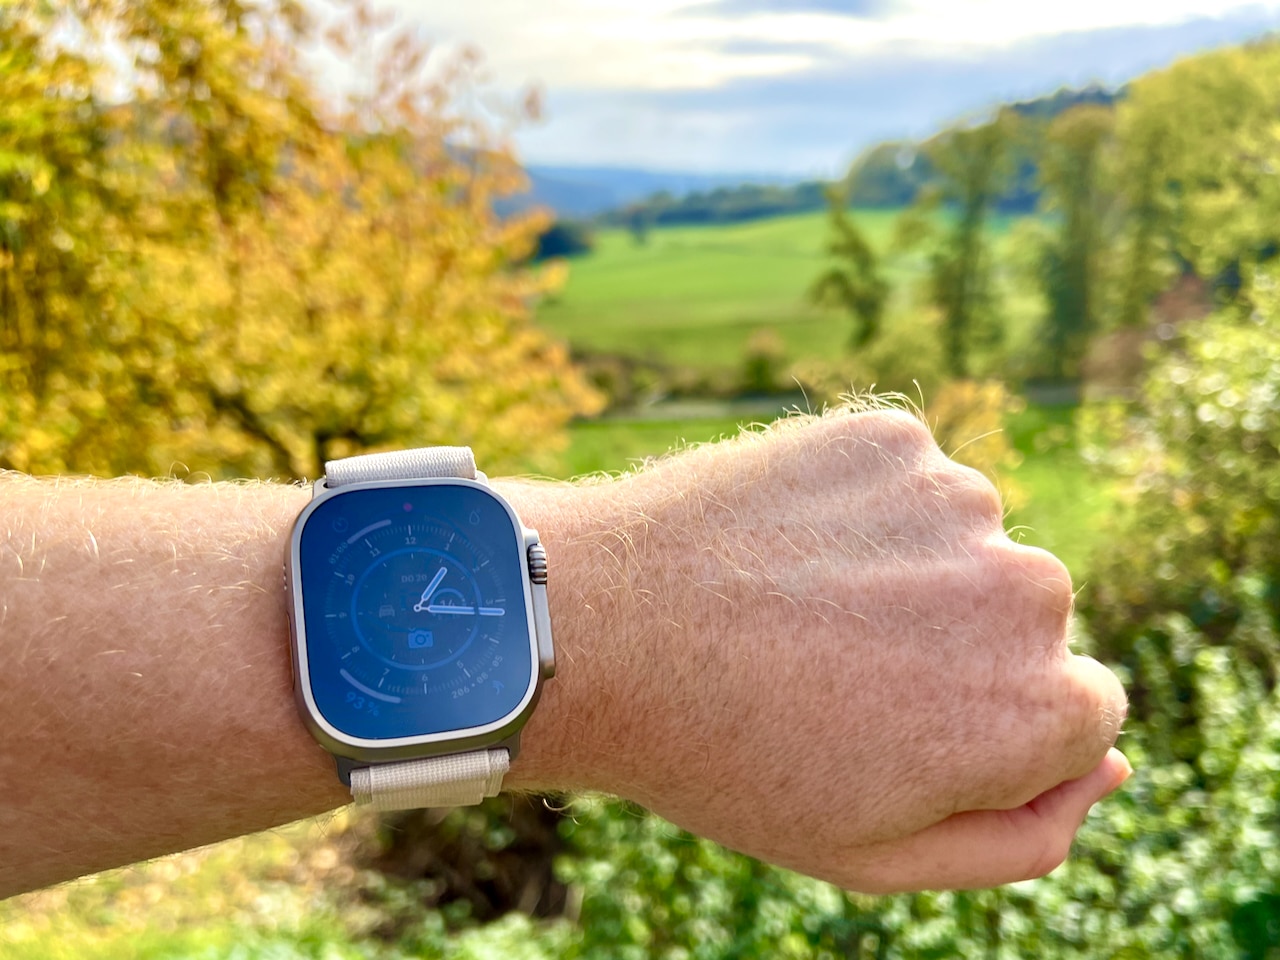 Apple Watch Ultra test & experiences - outdoor smartwatch for every adventure?